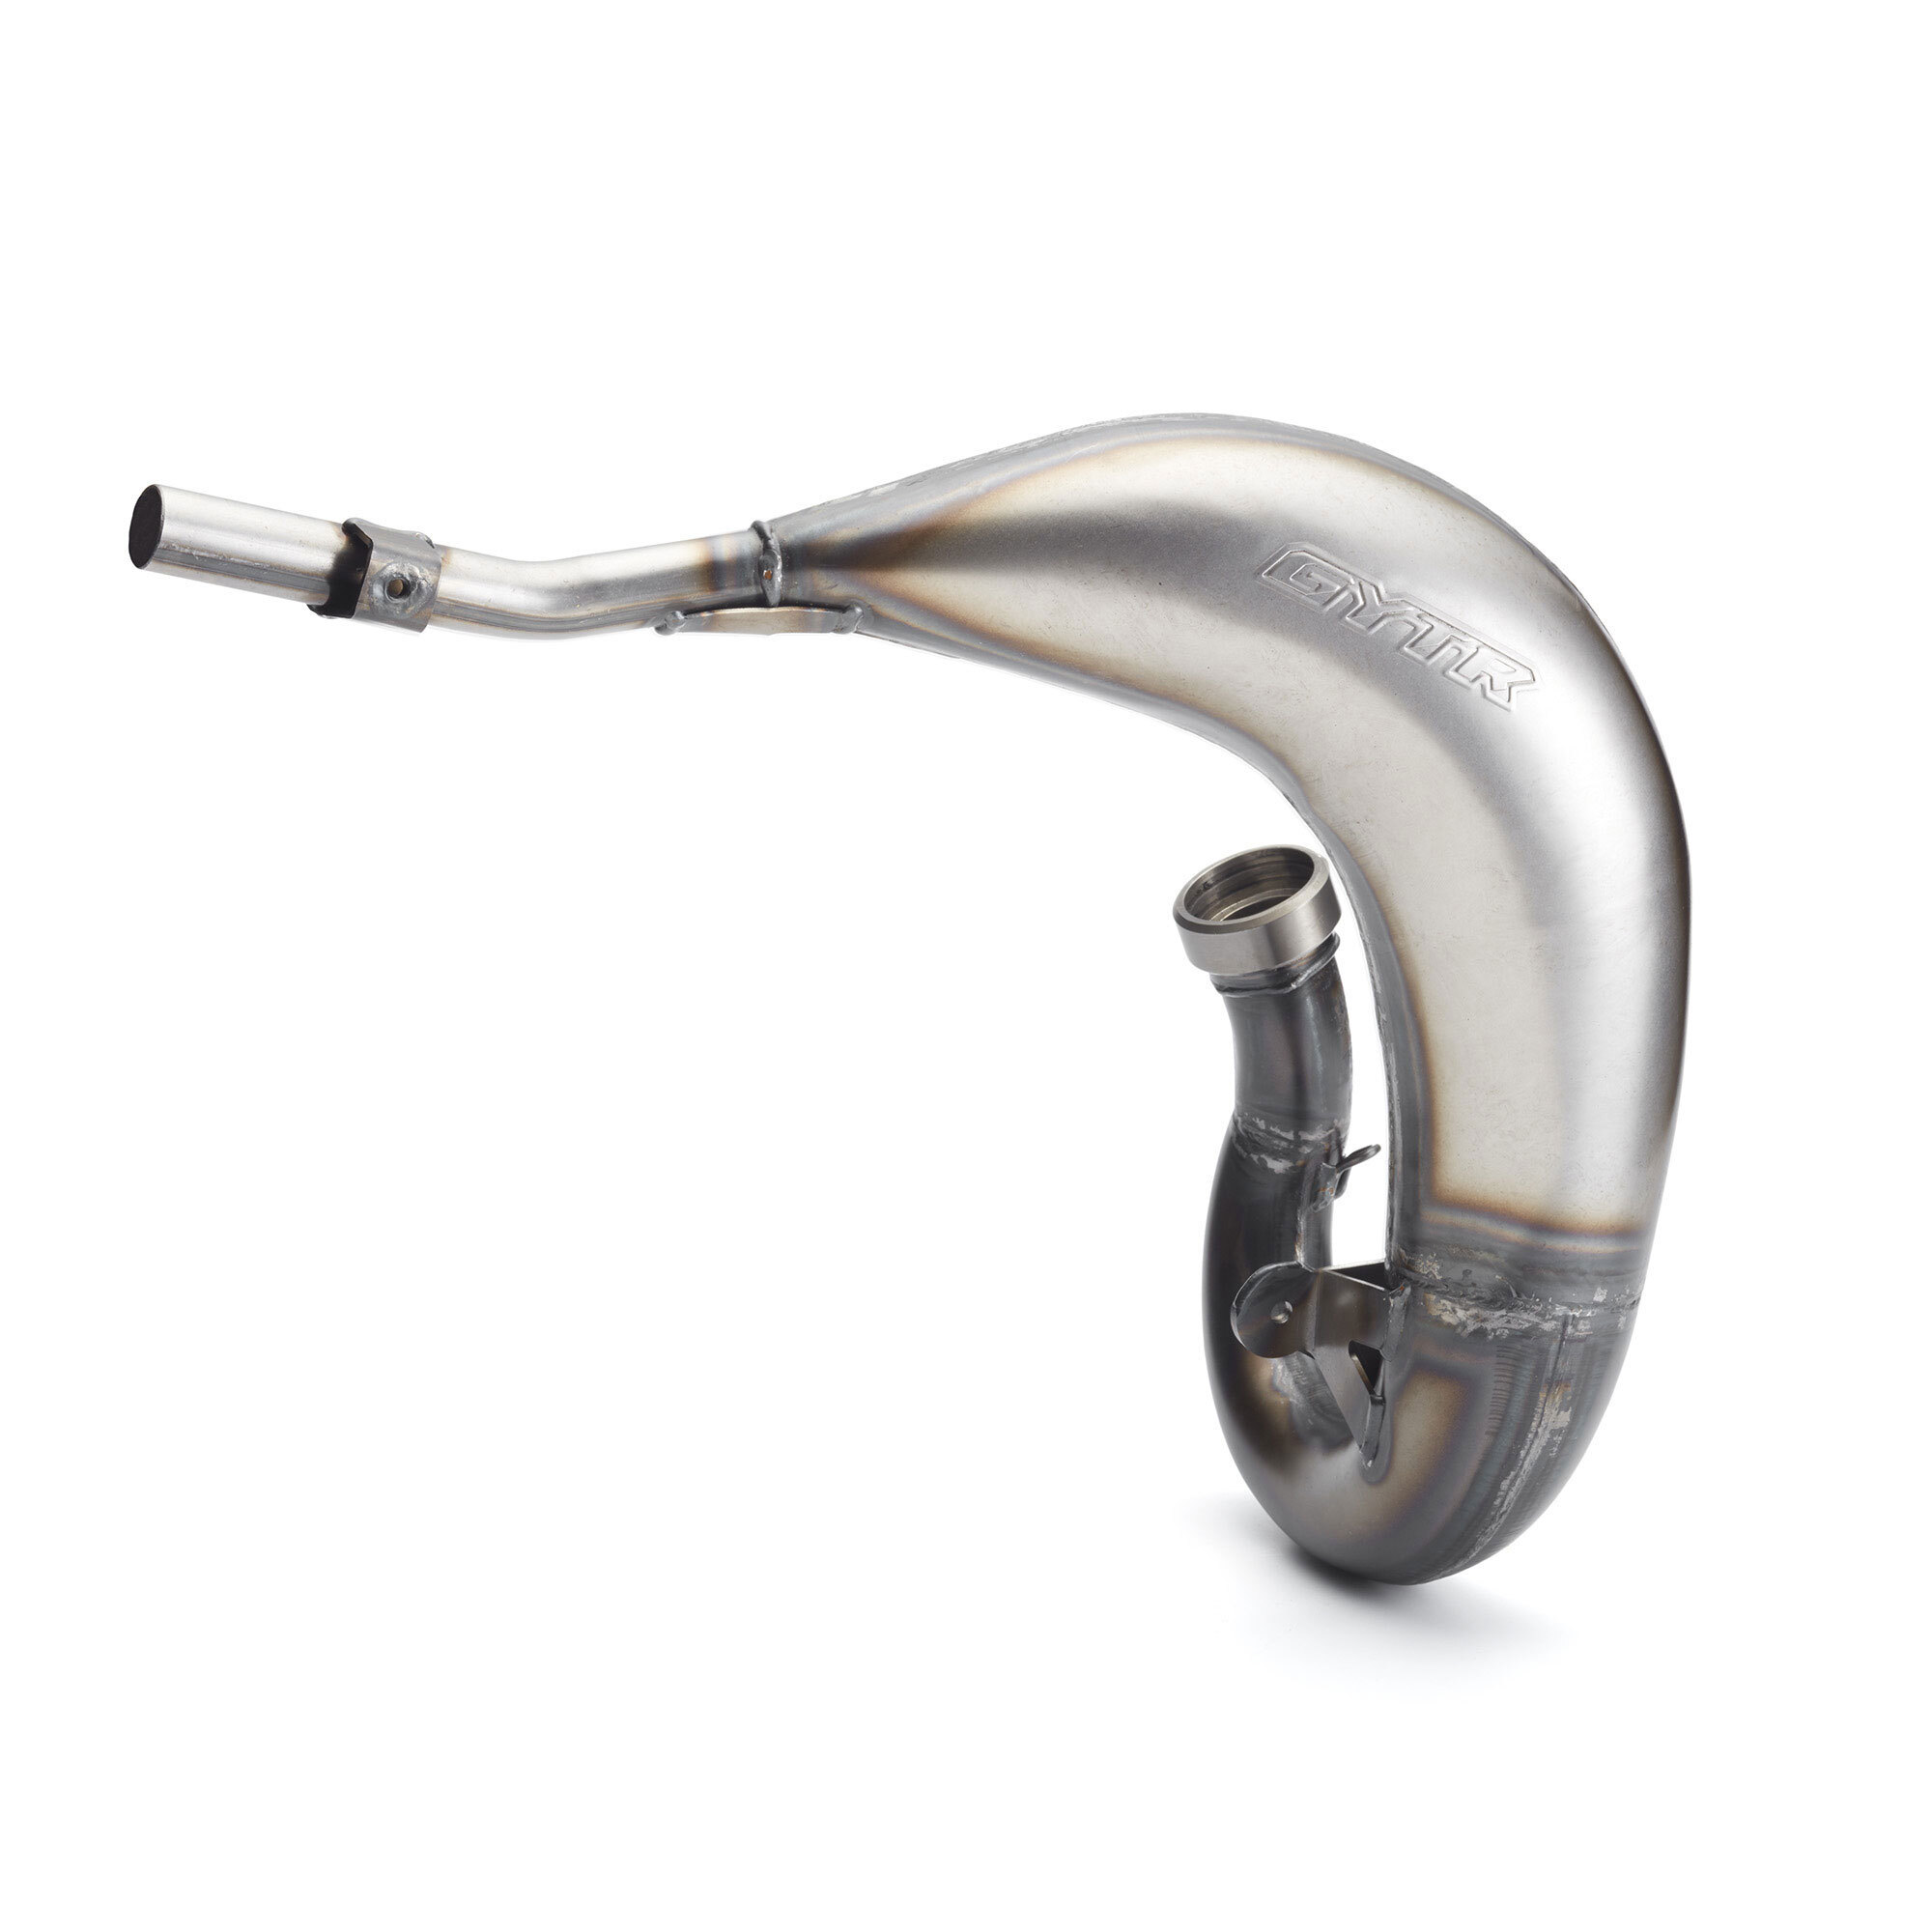 GYTR® Exhaust Pipe